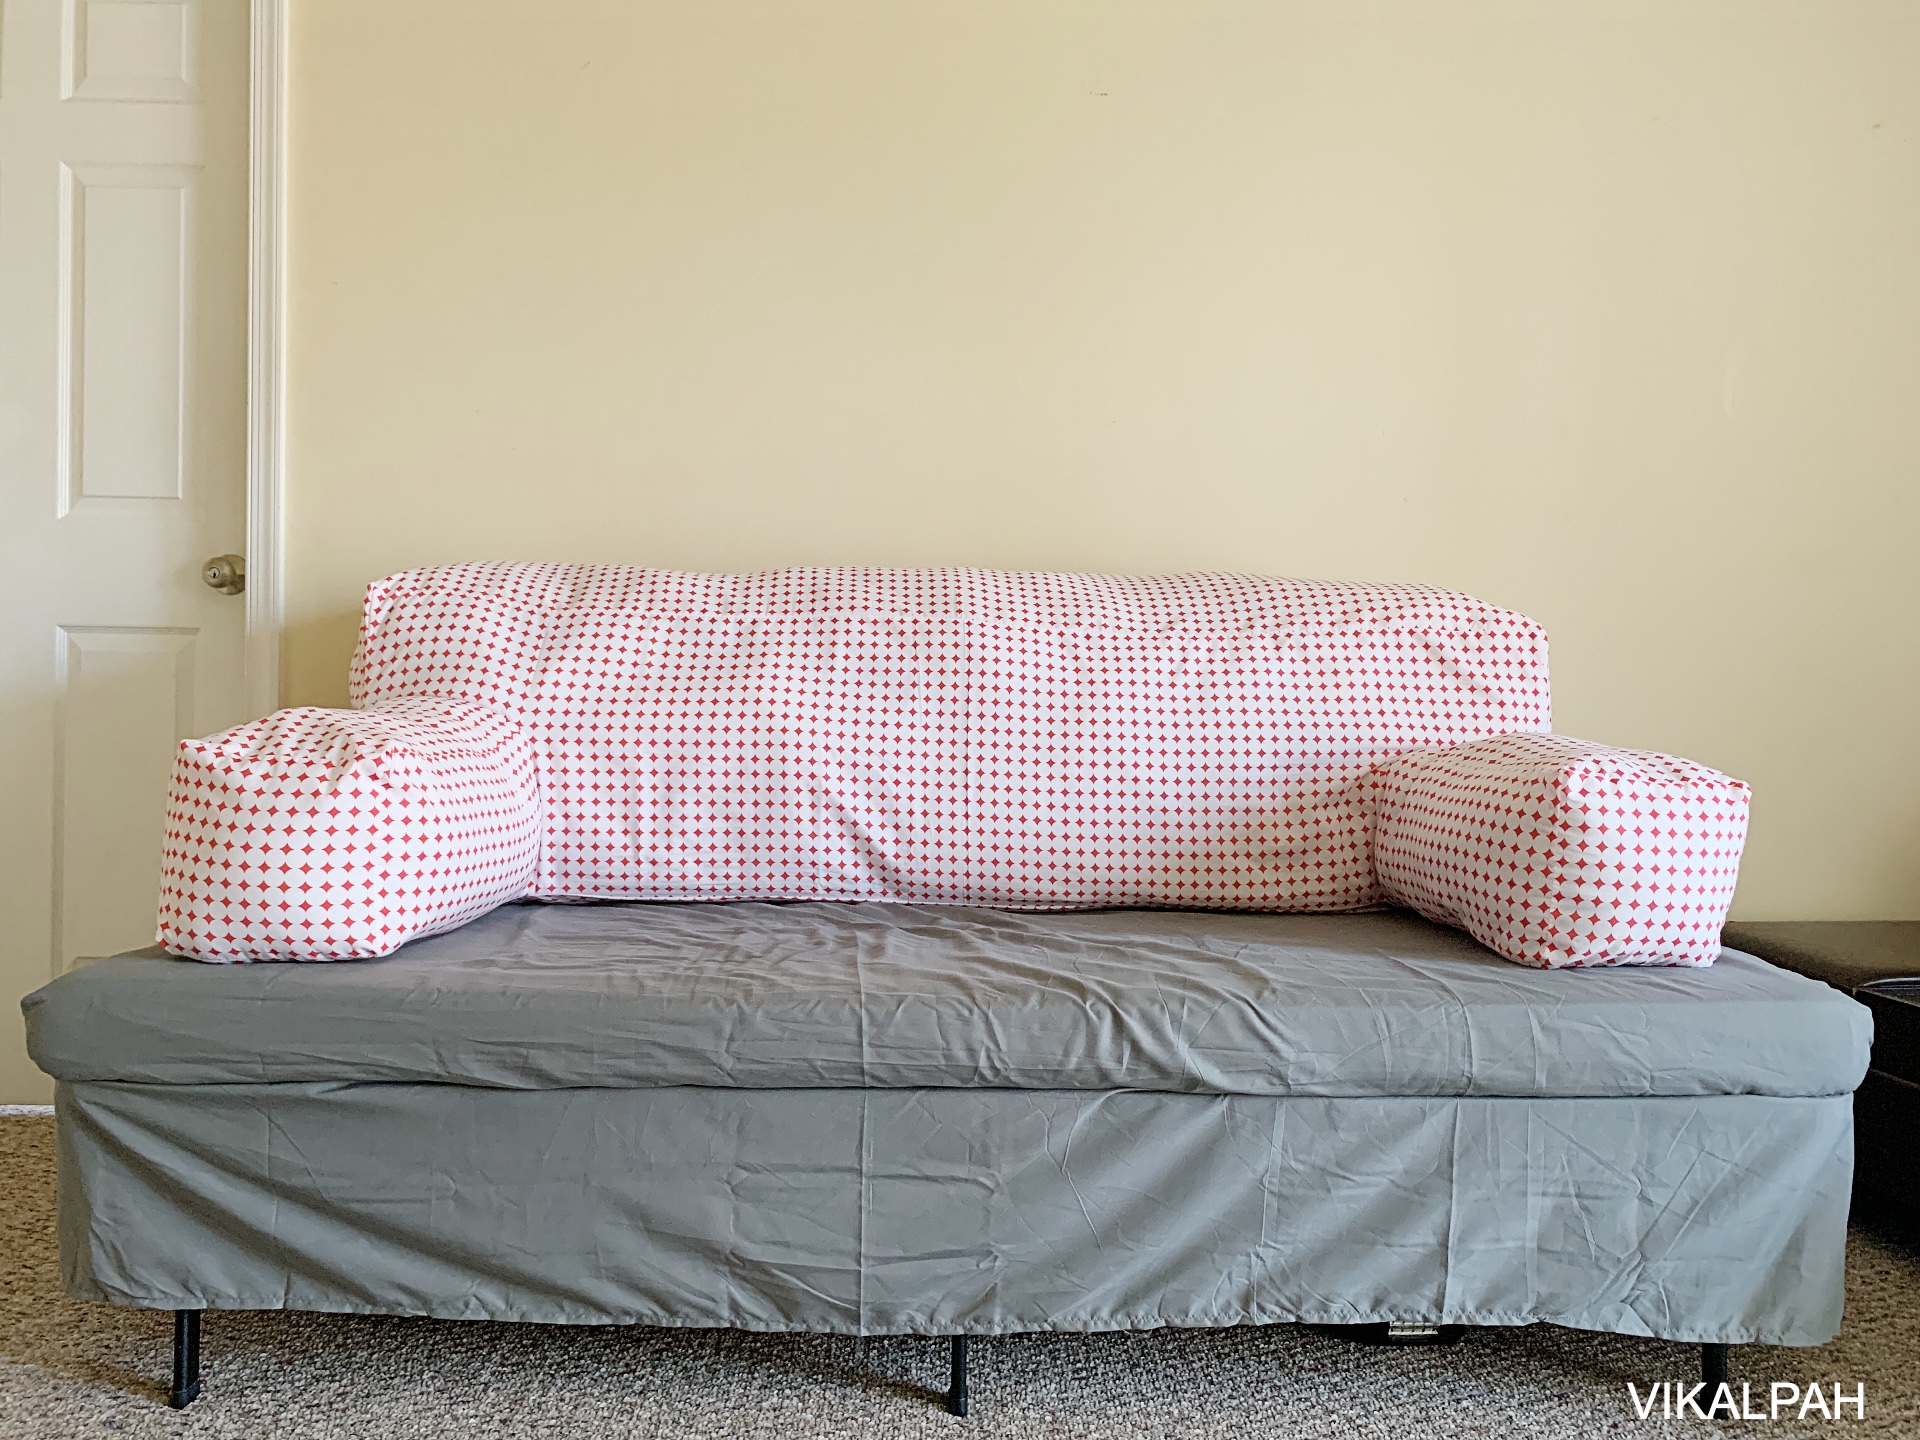 Twin Bed Into A Couch Diy Cover, How To Use A Twin Bed As Couch